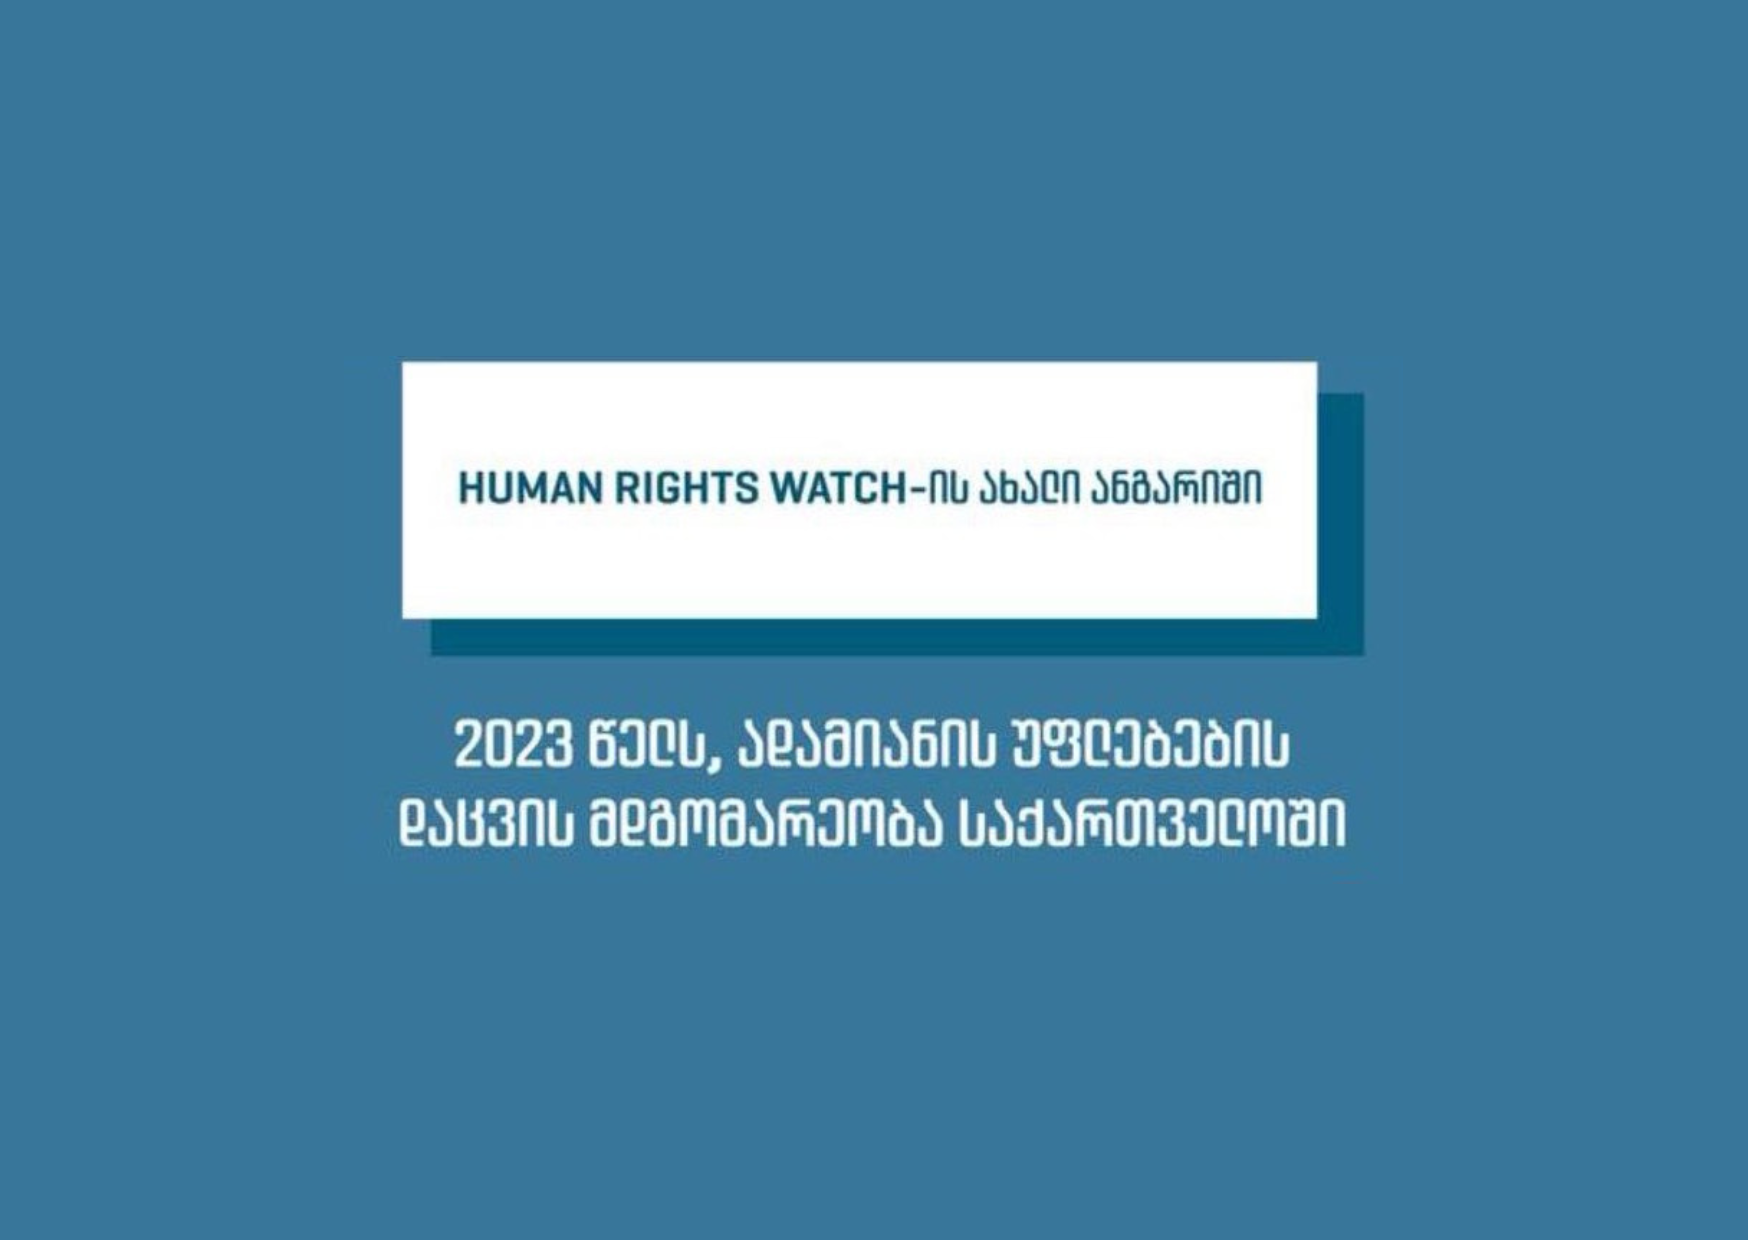 Human rights protection in Georgia in 2023